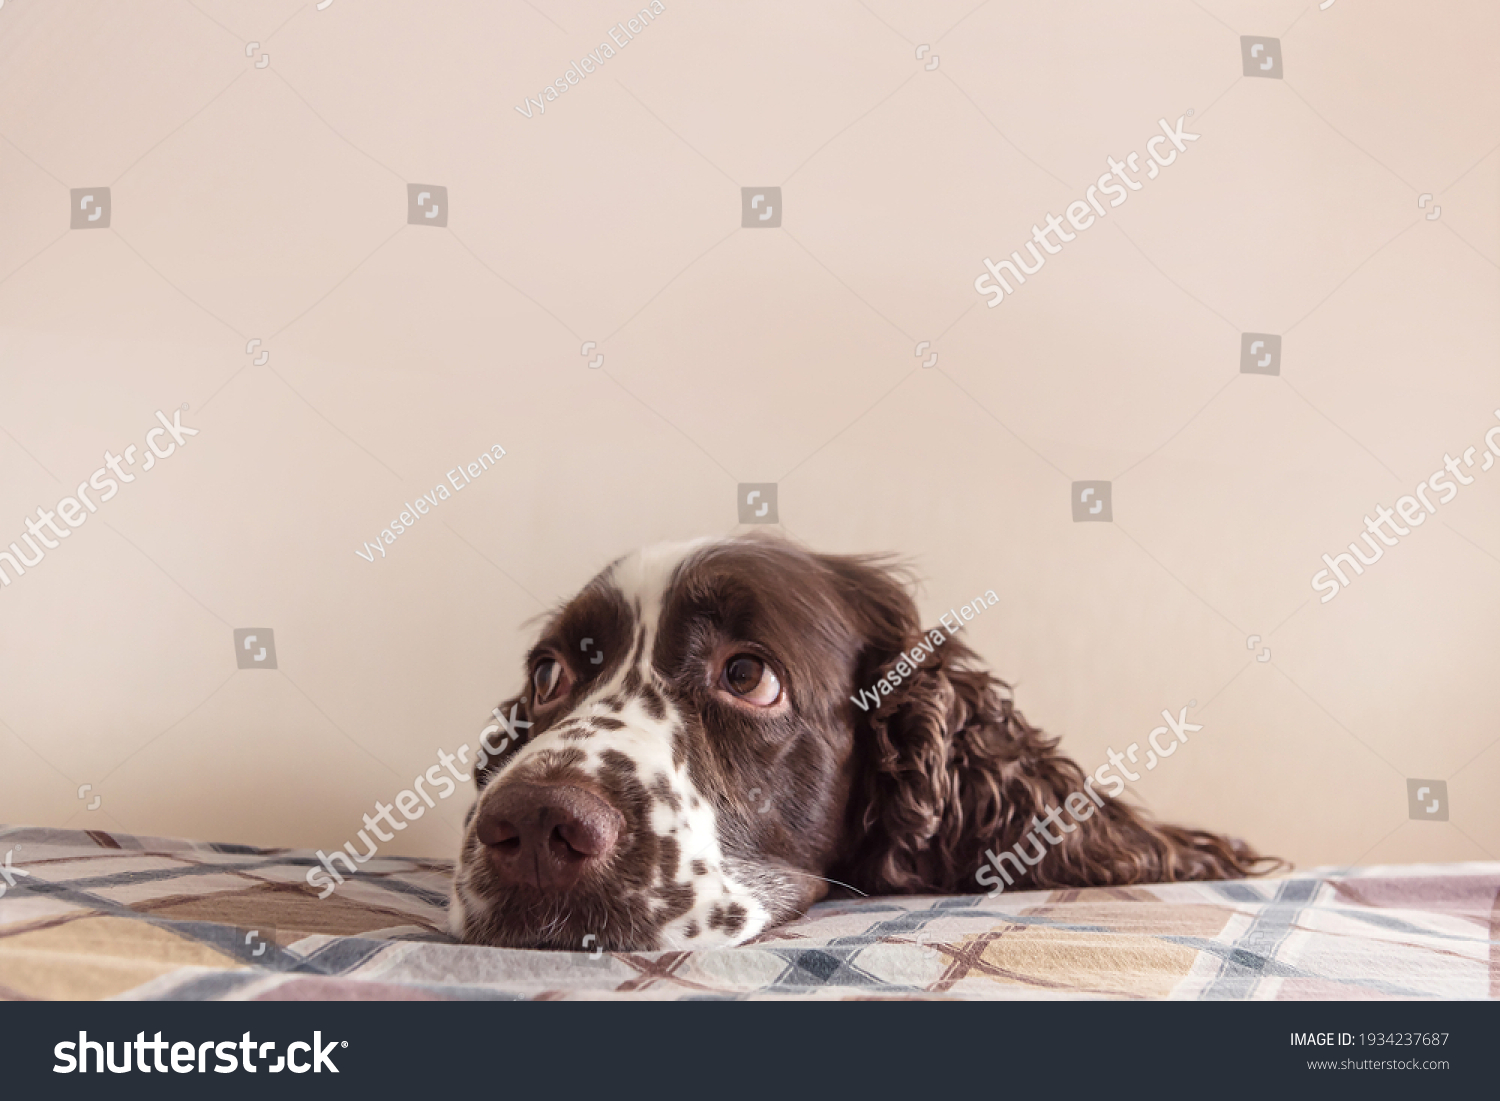 Dog with cute sentimental eyes put it muzzle on a bed. Staying alone at home, dog depression, dog anxiety from being left at home concept #1934237687